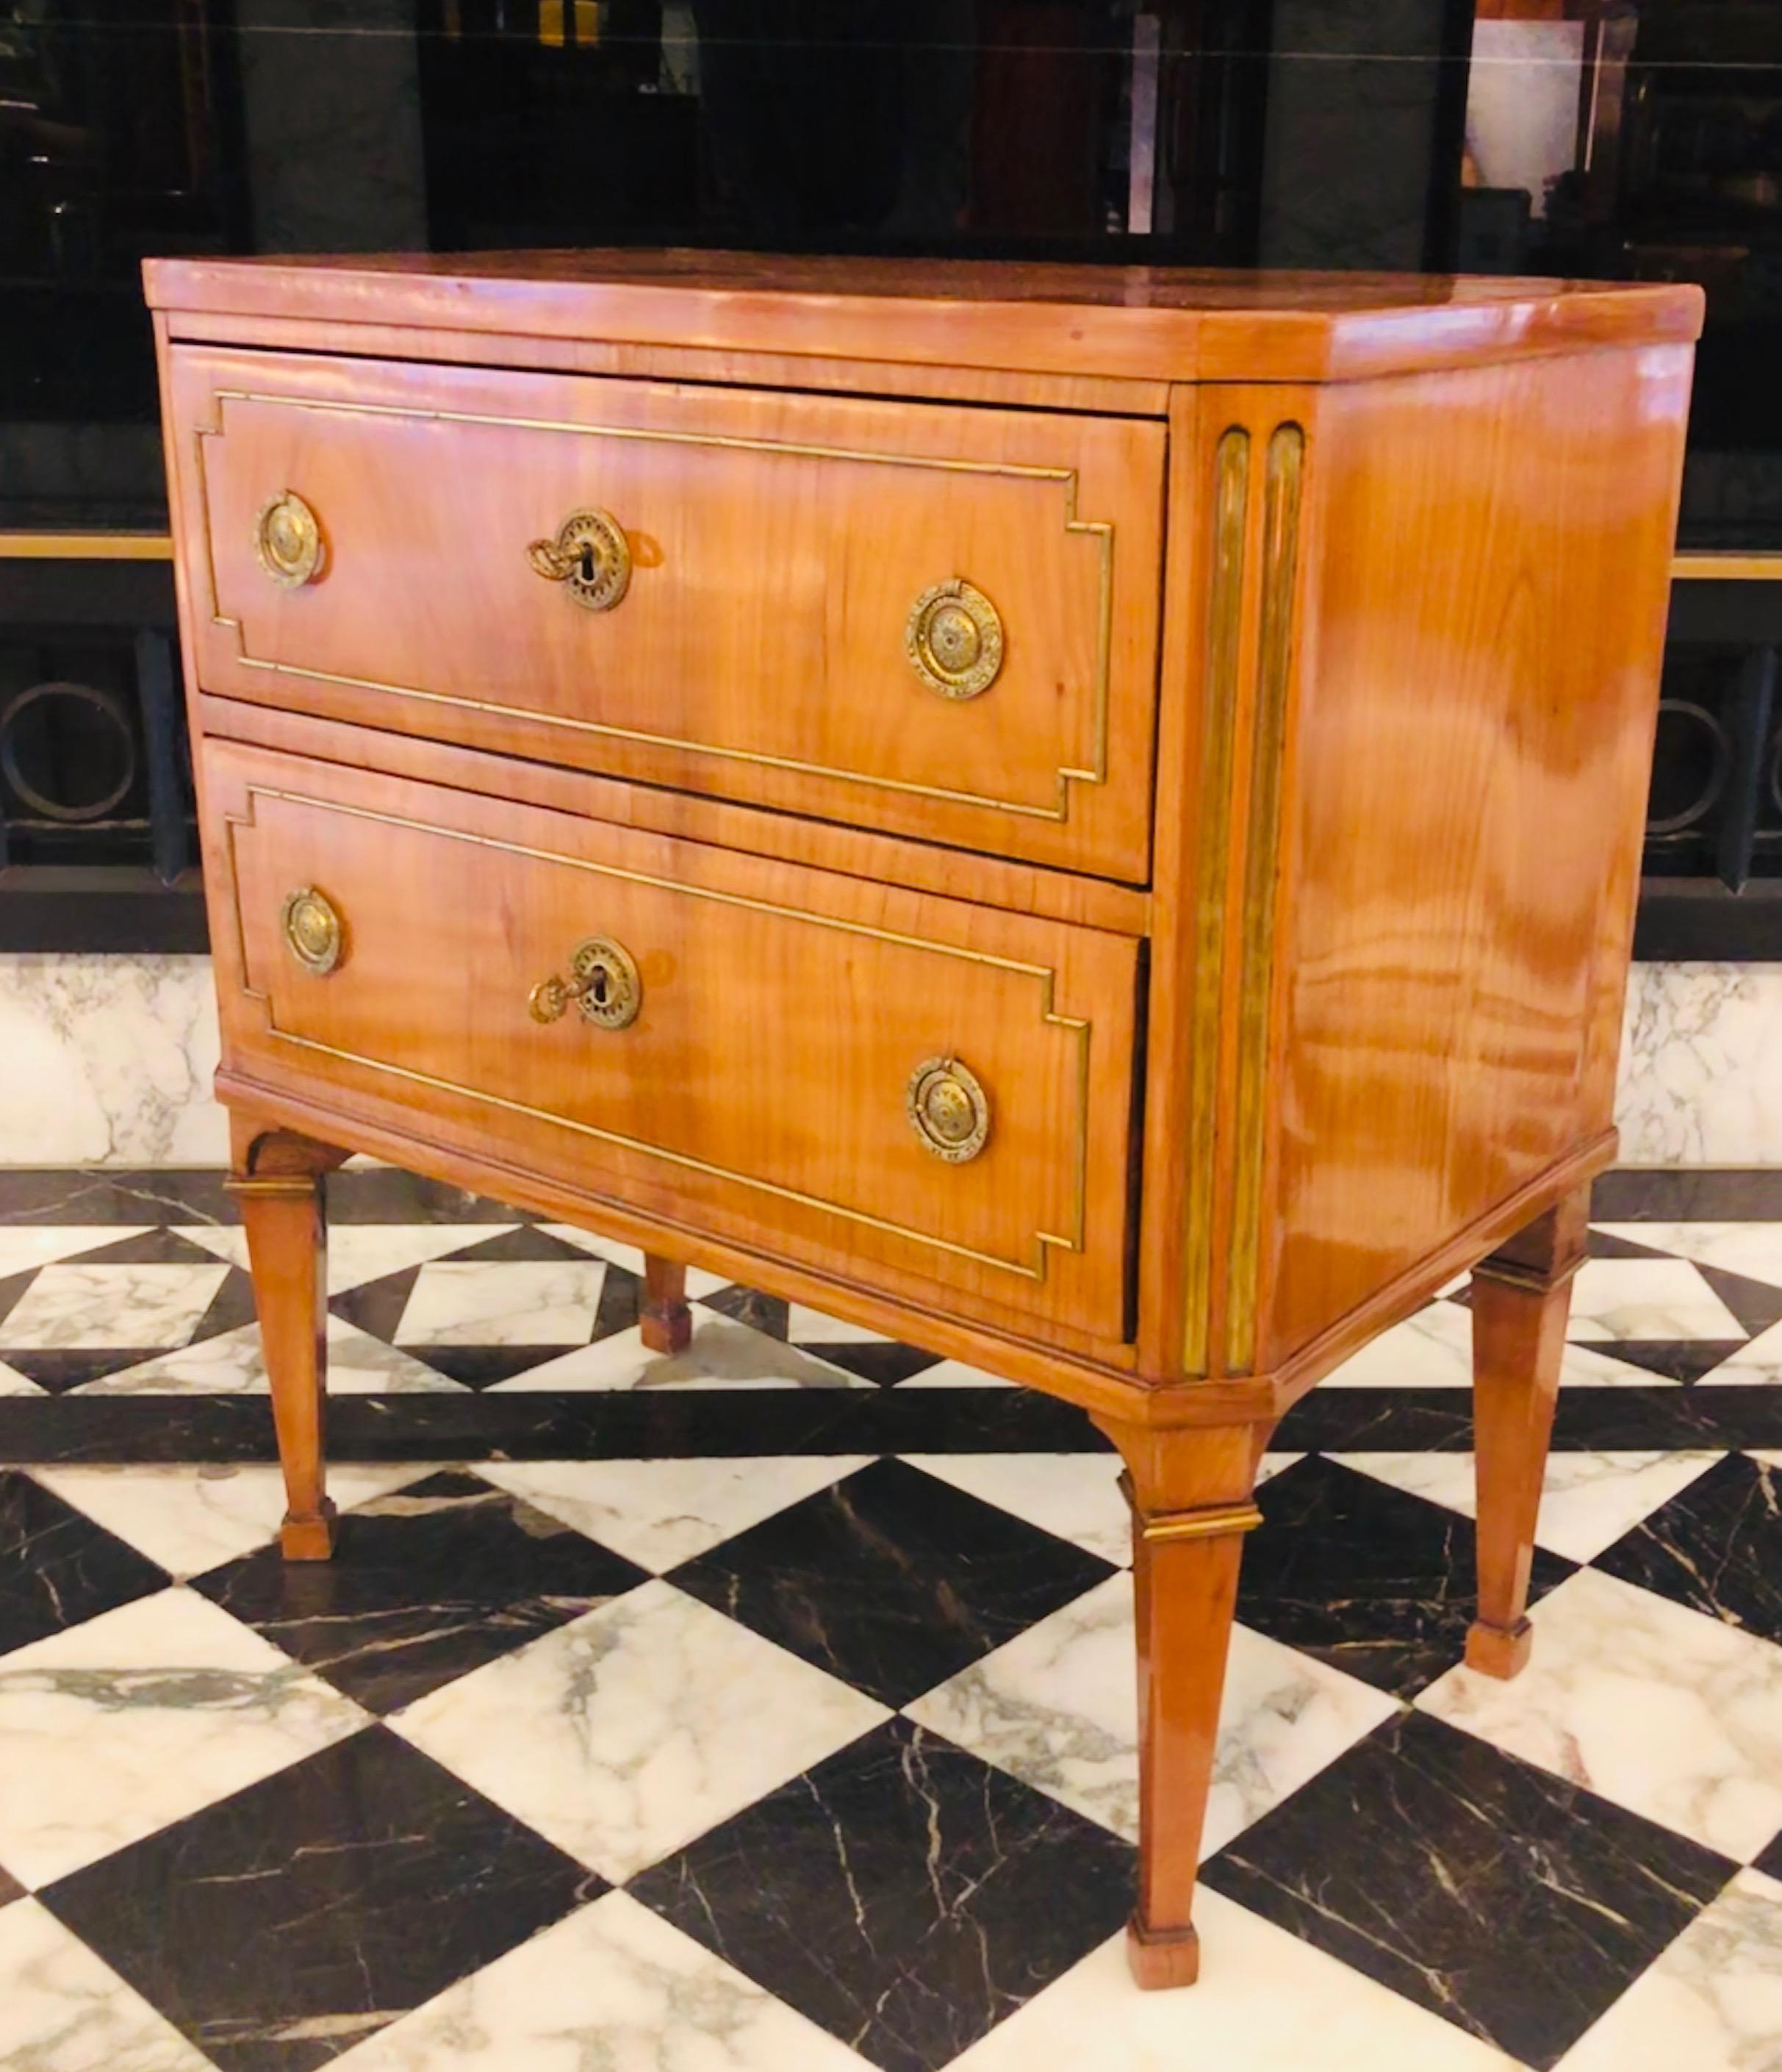 German Louis XVI Klassik Empire cherrywood commode circa 1770 from the private residential rooms of the offices of both German Presidents Richard von Weizsäcker and Roman Herzog in Castle Bellevue Berlin ( the White House of Germany )
The body and